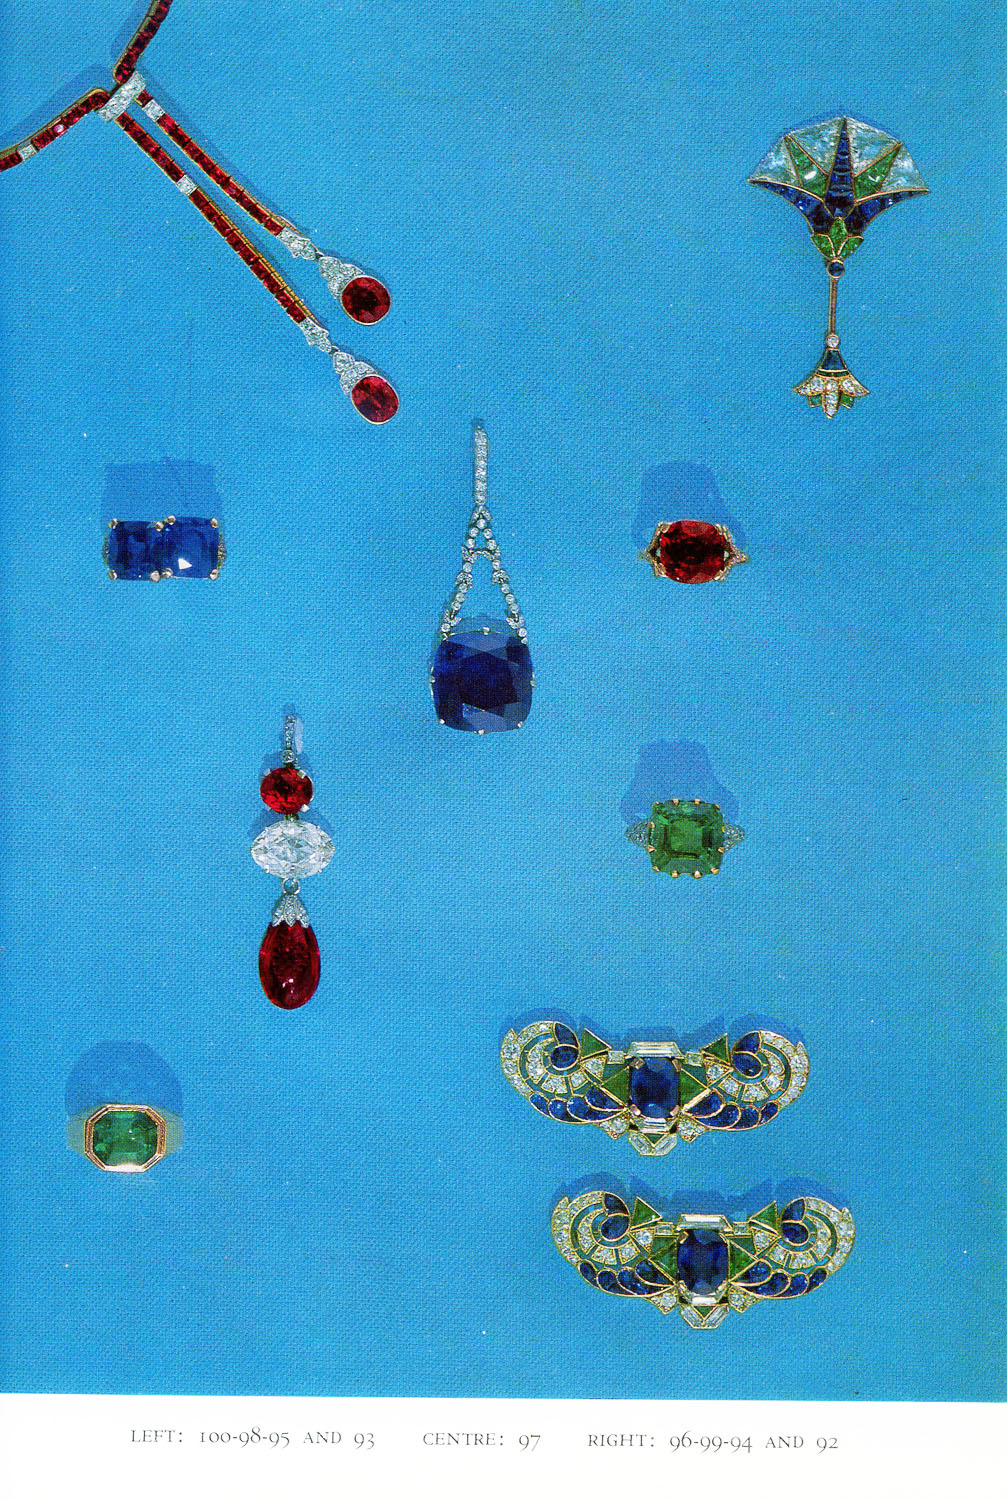 Jewelry, Including 24.9 carat sapphire and diamond pendant (97, center), 9 carat emerald and diamond ring (94, right, lower middle), and diamond and sapphire brooches (92, lower right).